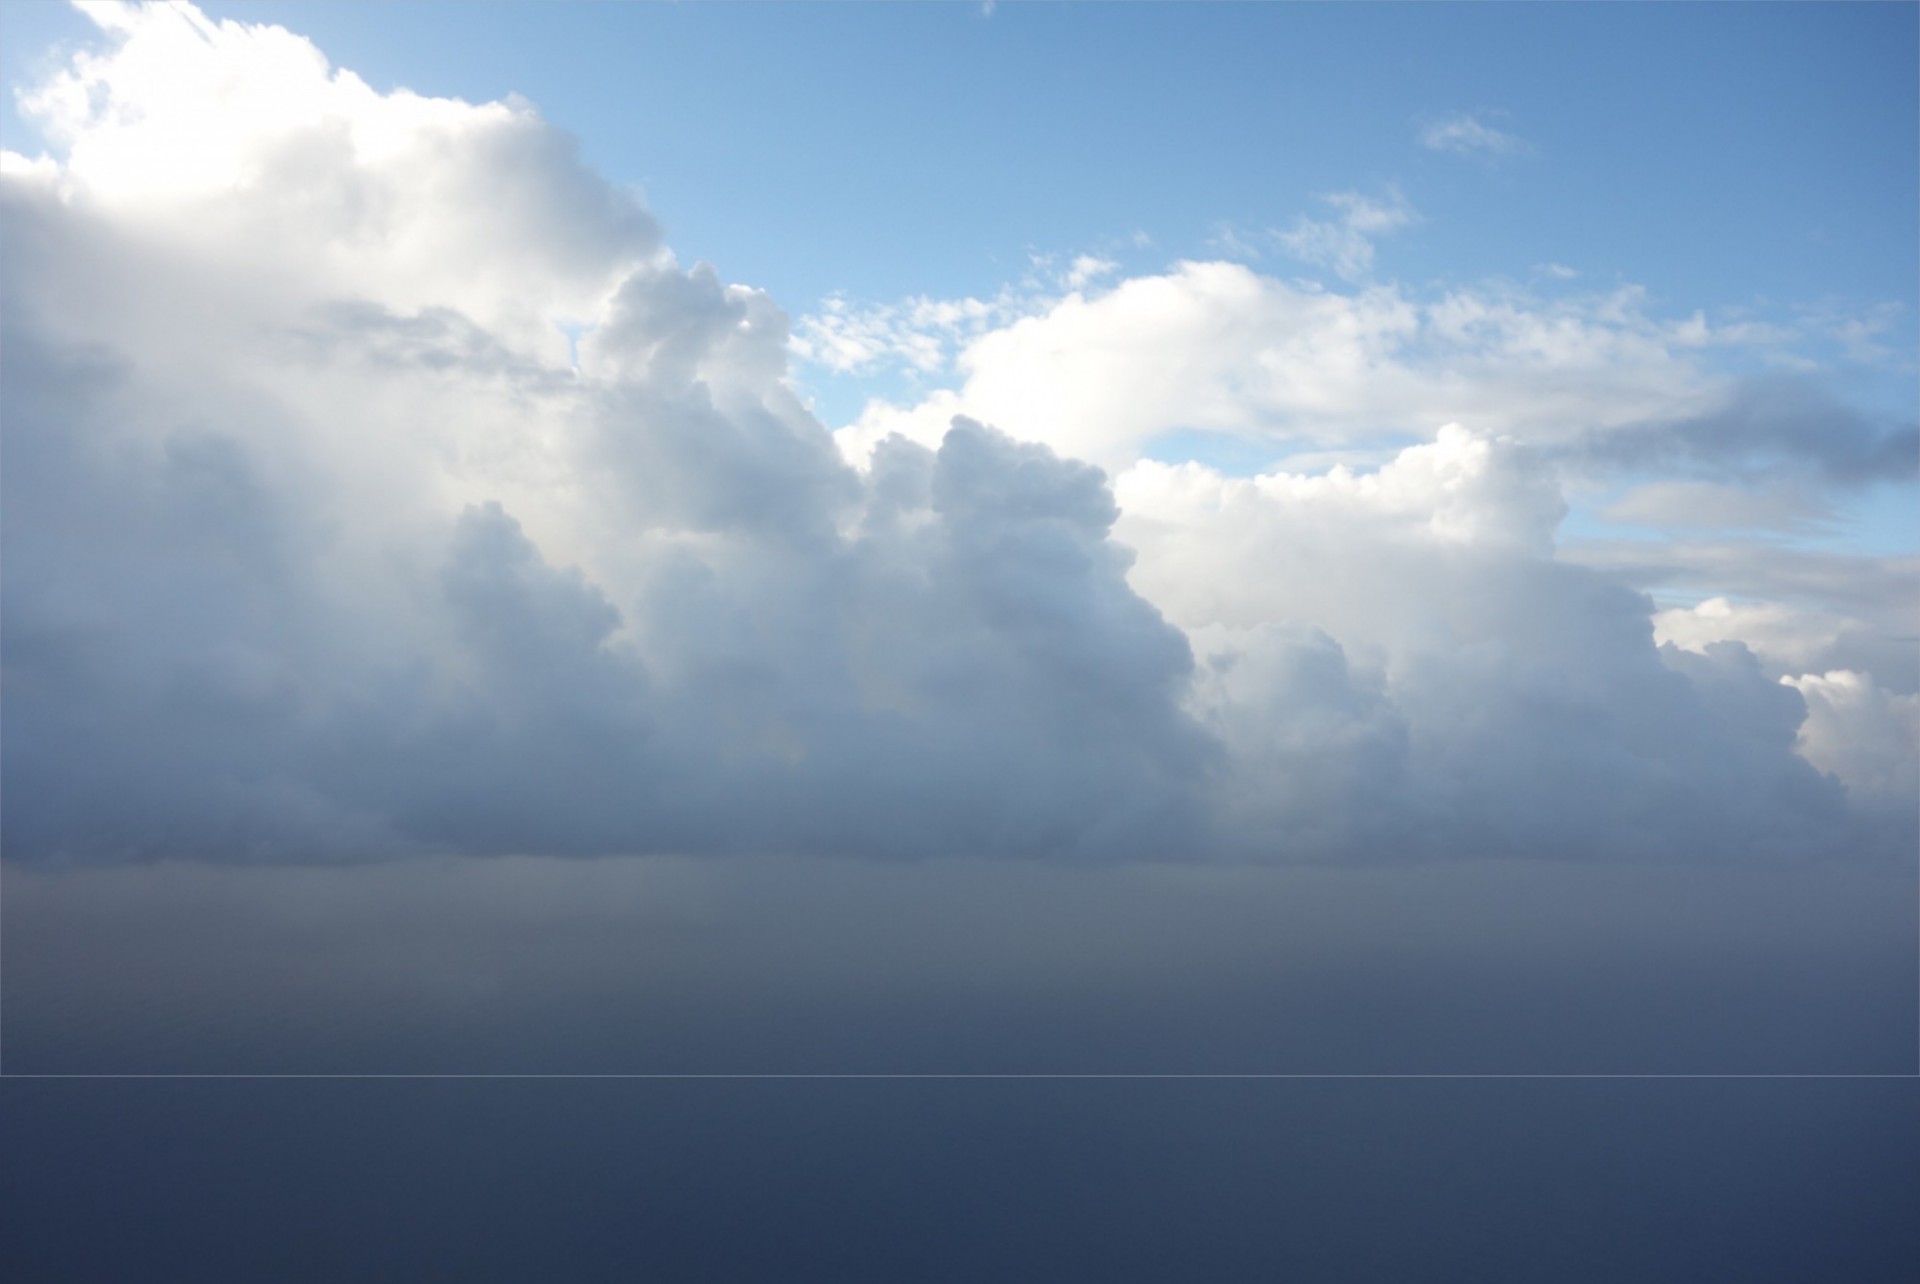 Clouds over the ocean near Barbados during the ATOMIC field experiment